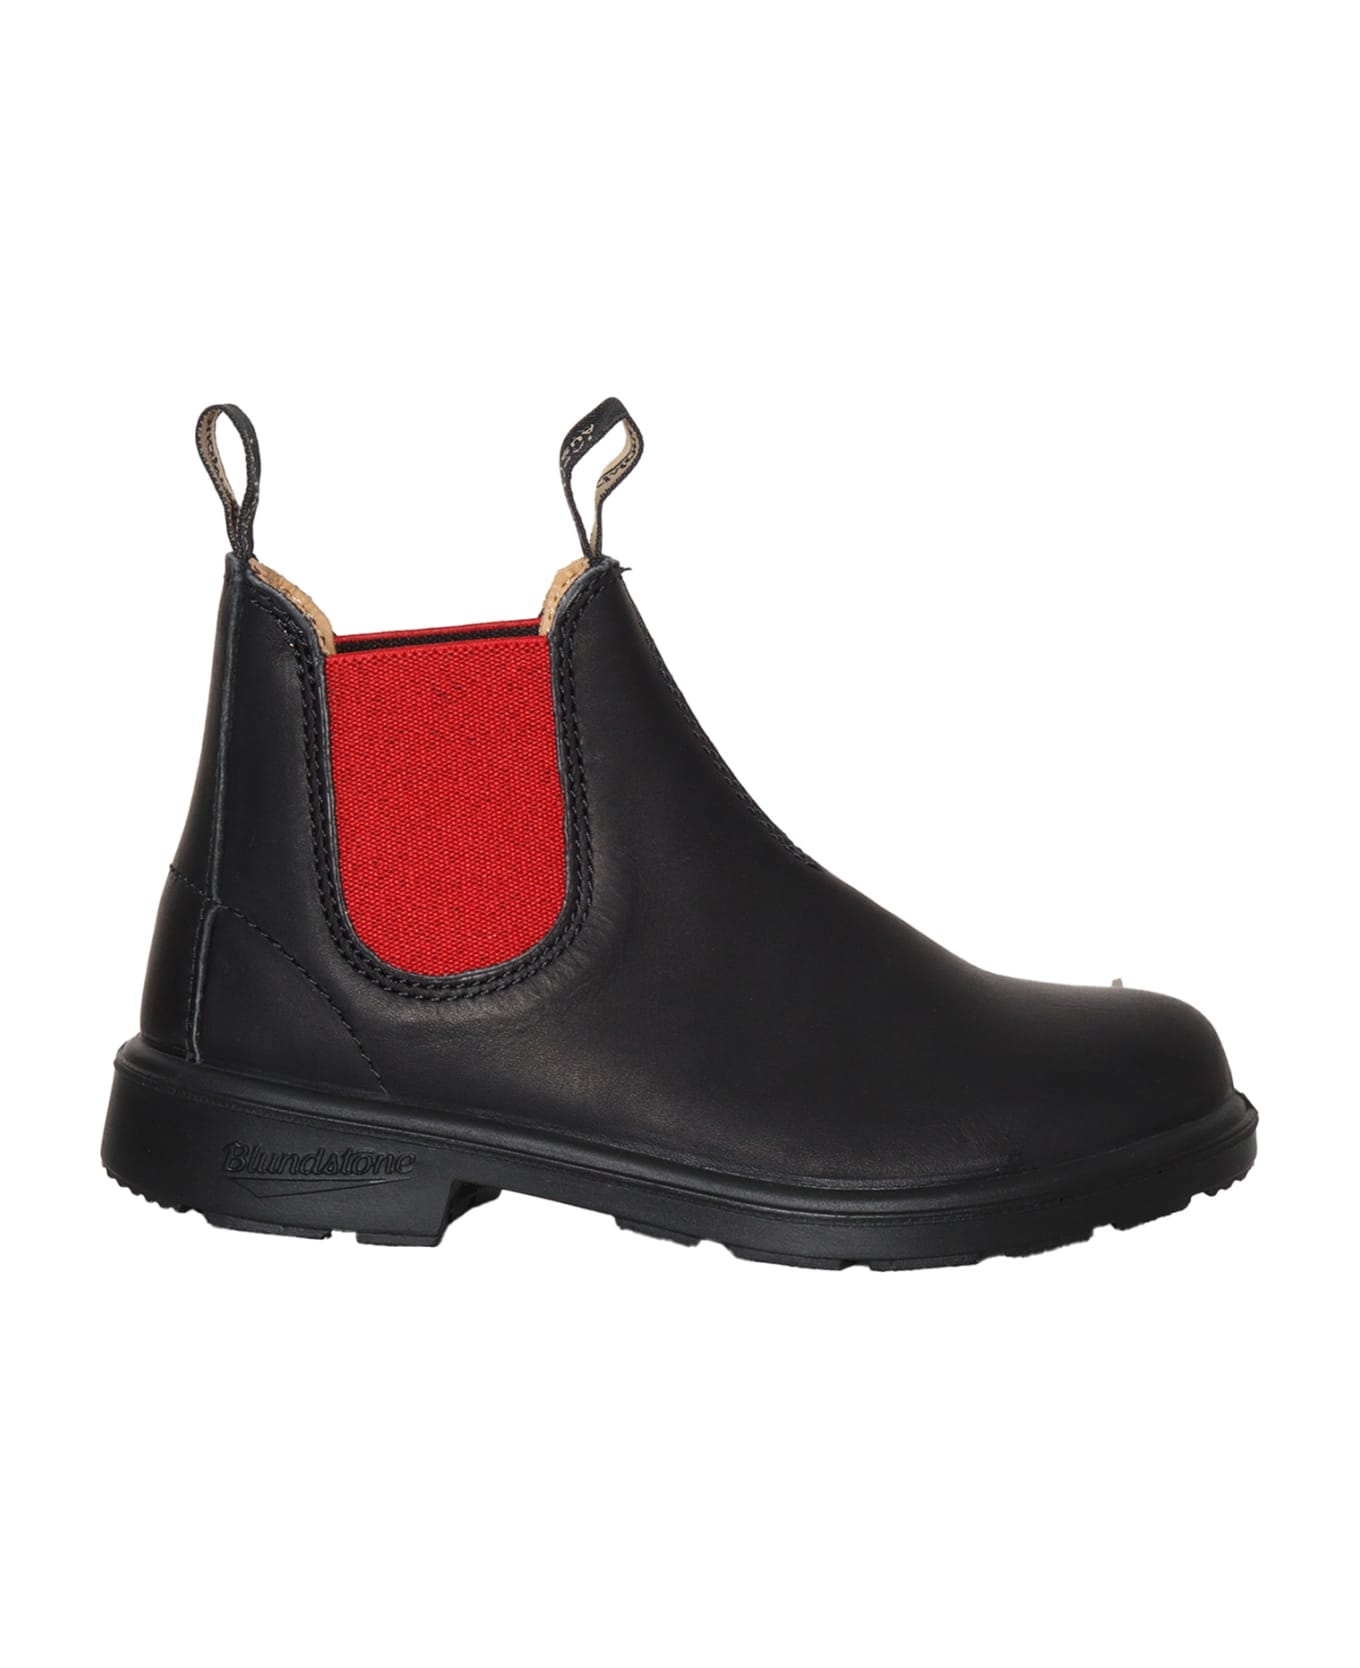 Blundstone 581 Ankle Boots - BLACK シューズ